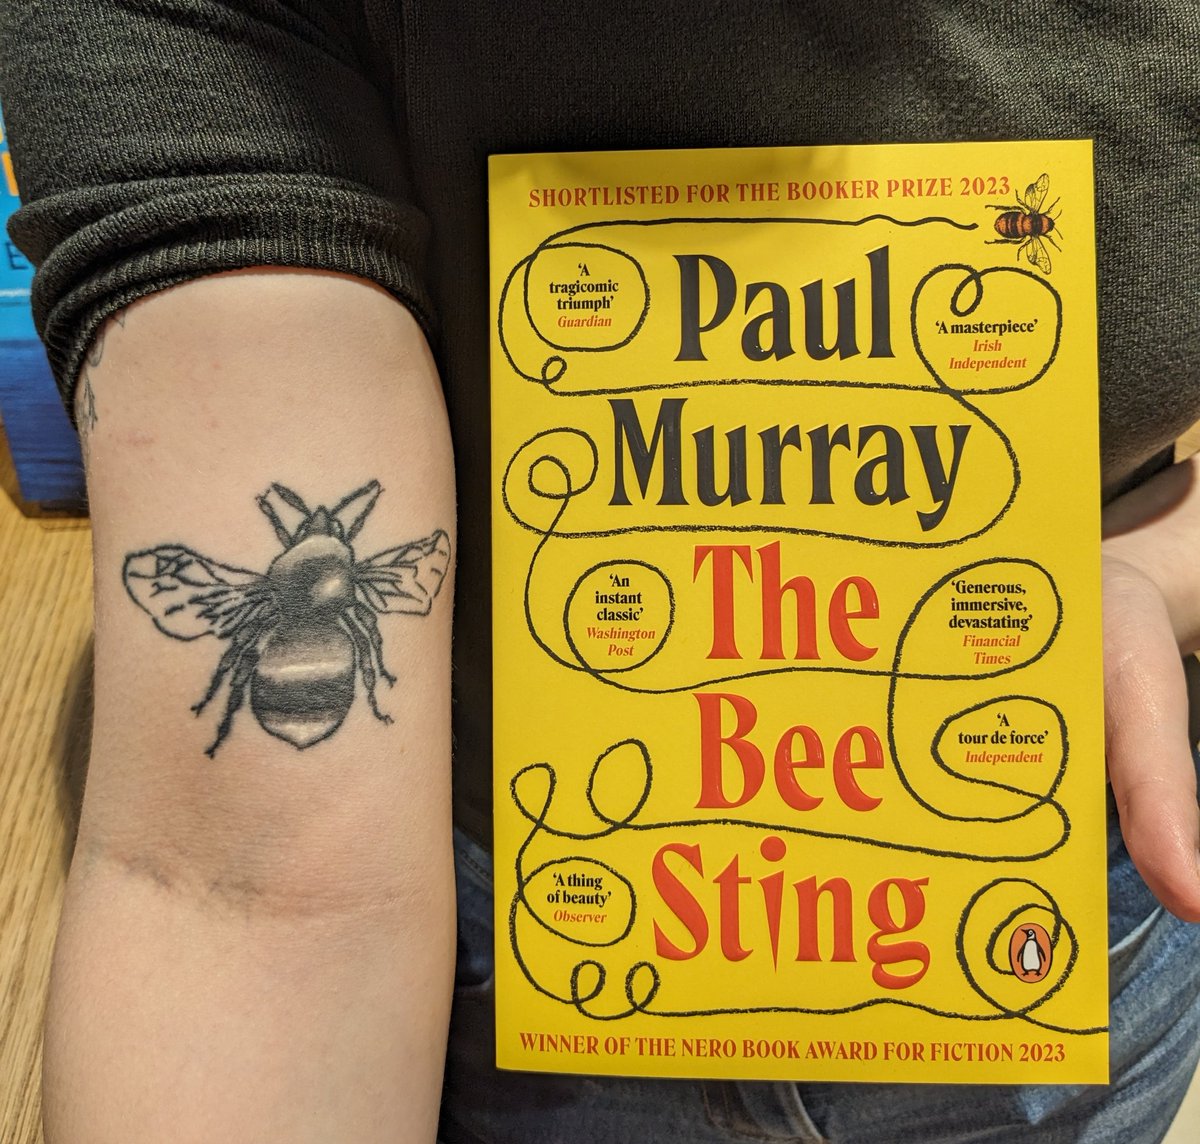 Our May Fiction Book of the Month is The Bee Sting by Paul Murray. One of the greatest living comic novelists follows up Skippy Dies with a beautifully crafted bittersweet delight about one family desperately attempting to get through the most trying of times.